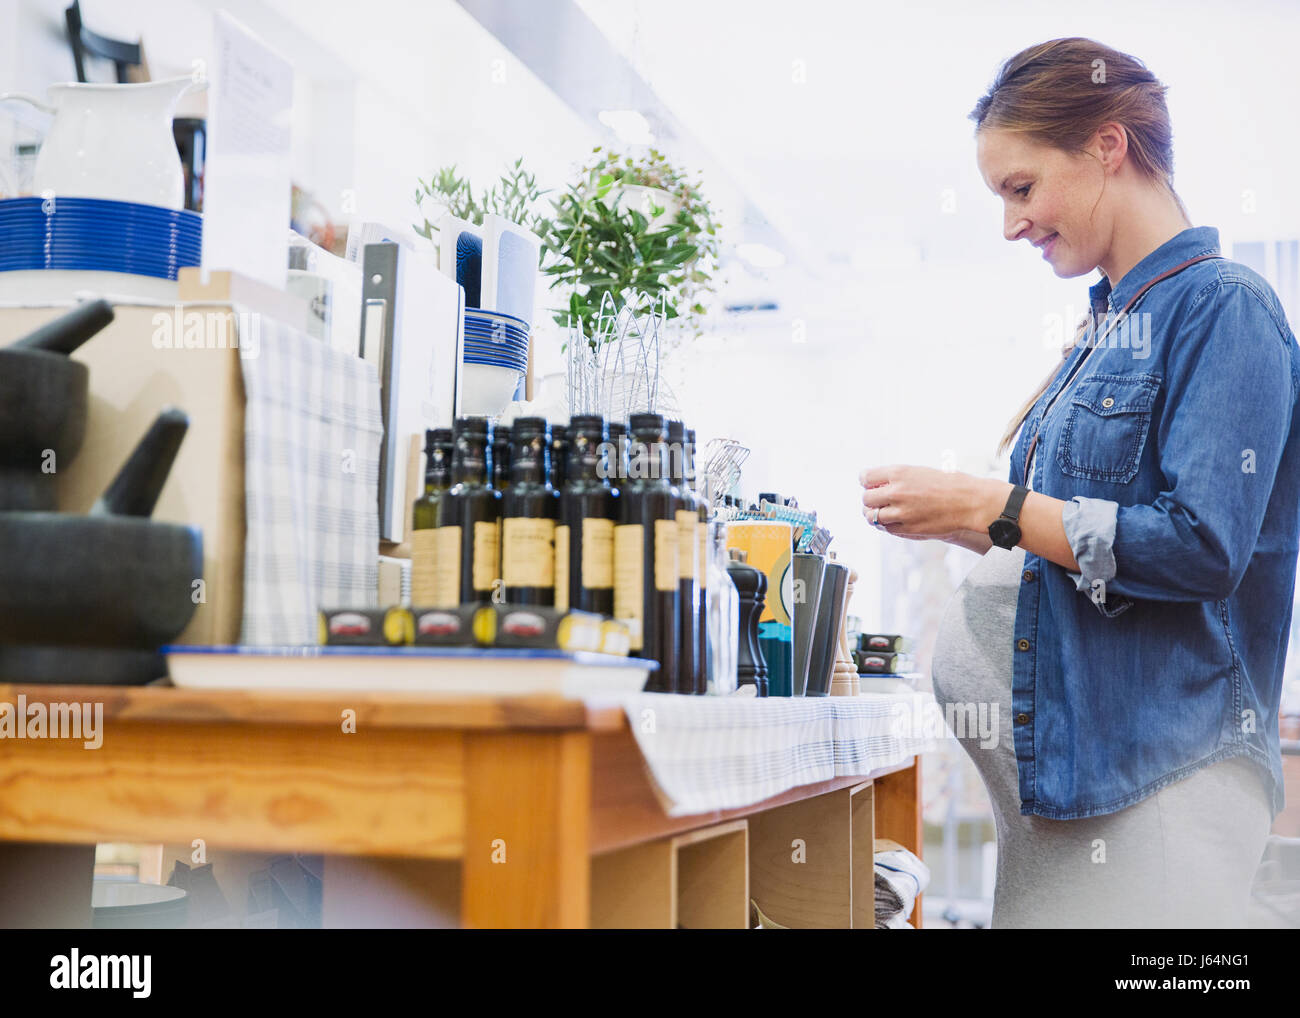 Pregnant woman shopping, browsing olive oil in shop Stock Photo